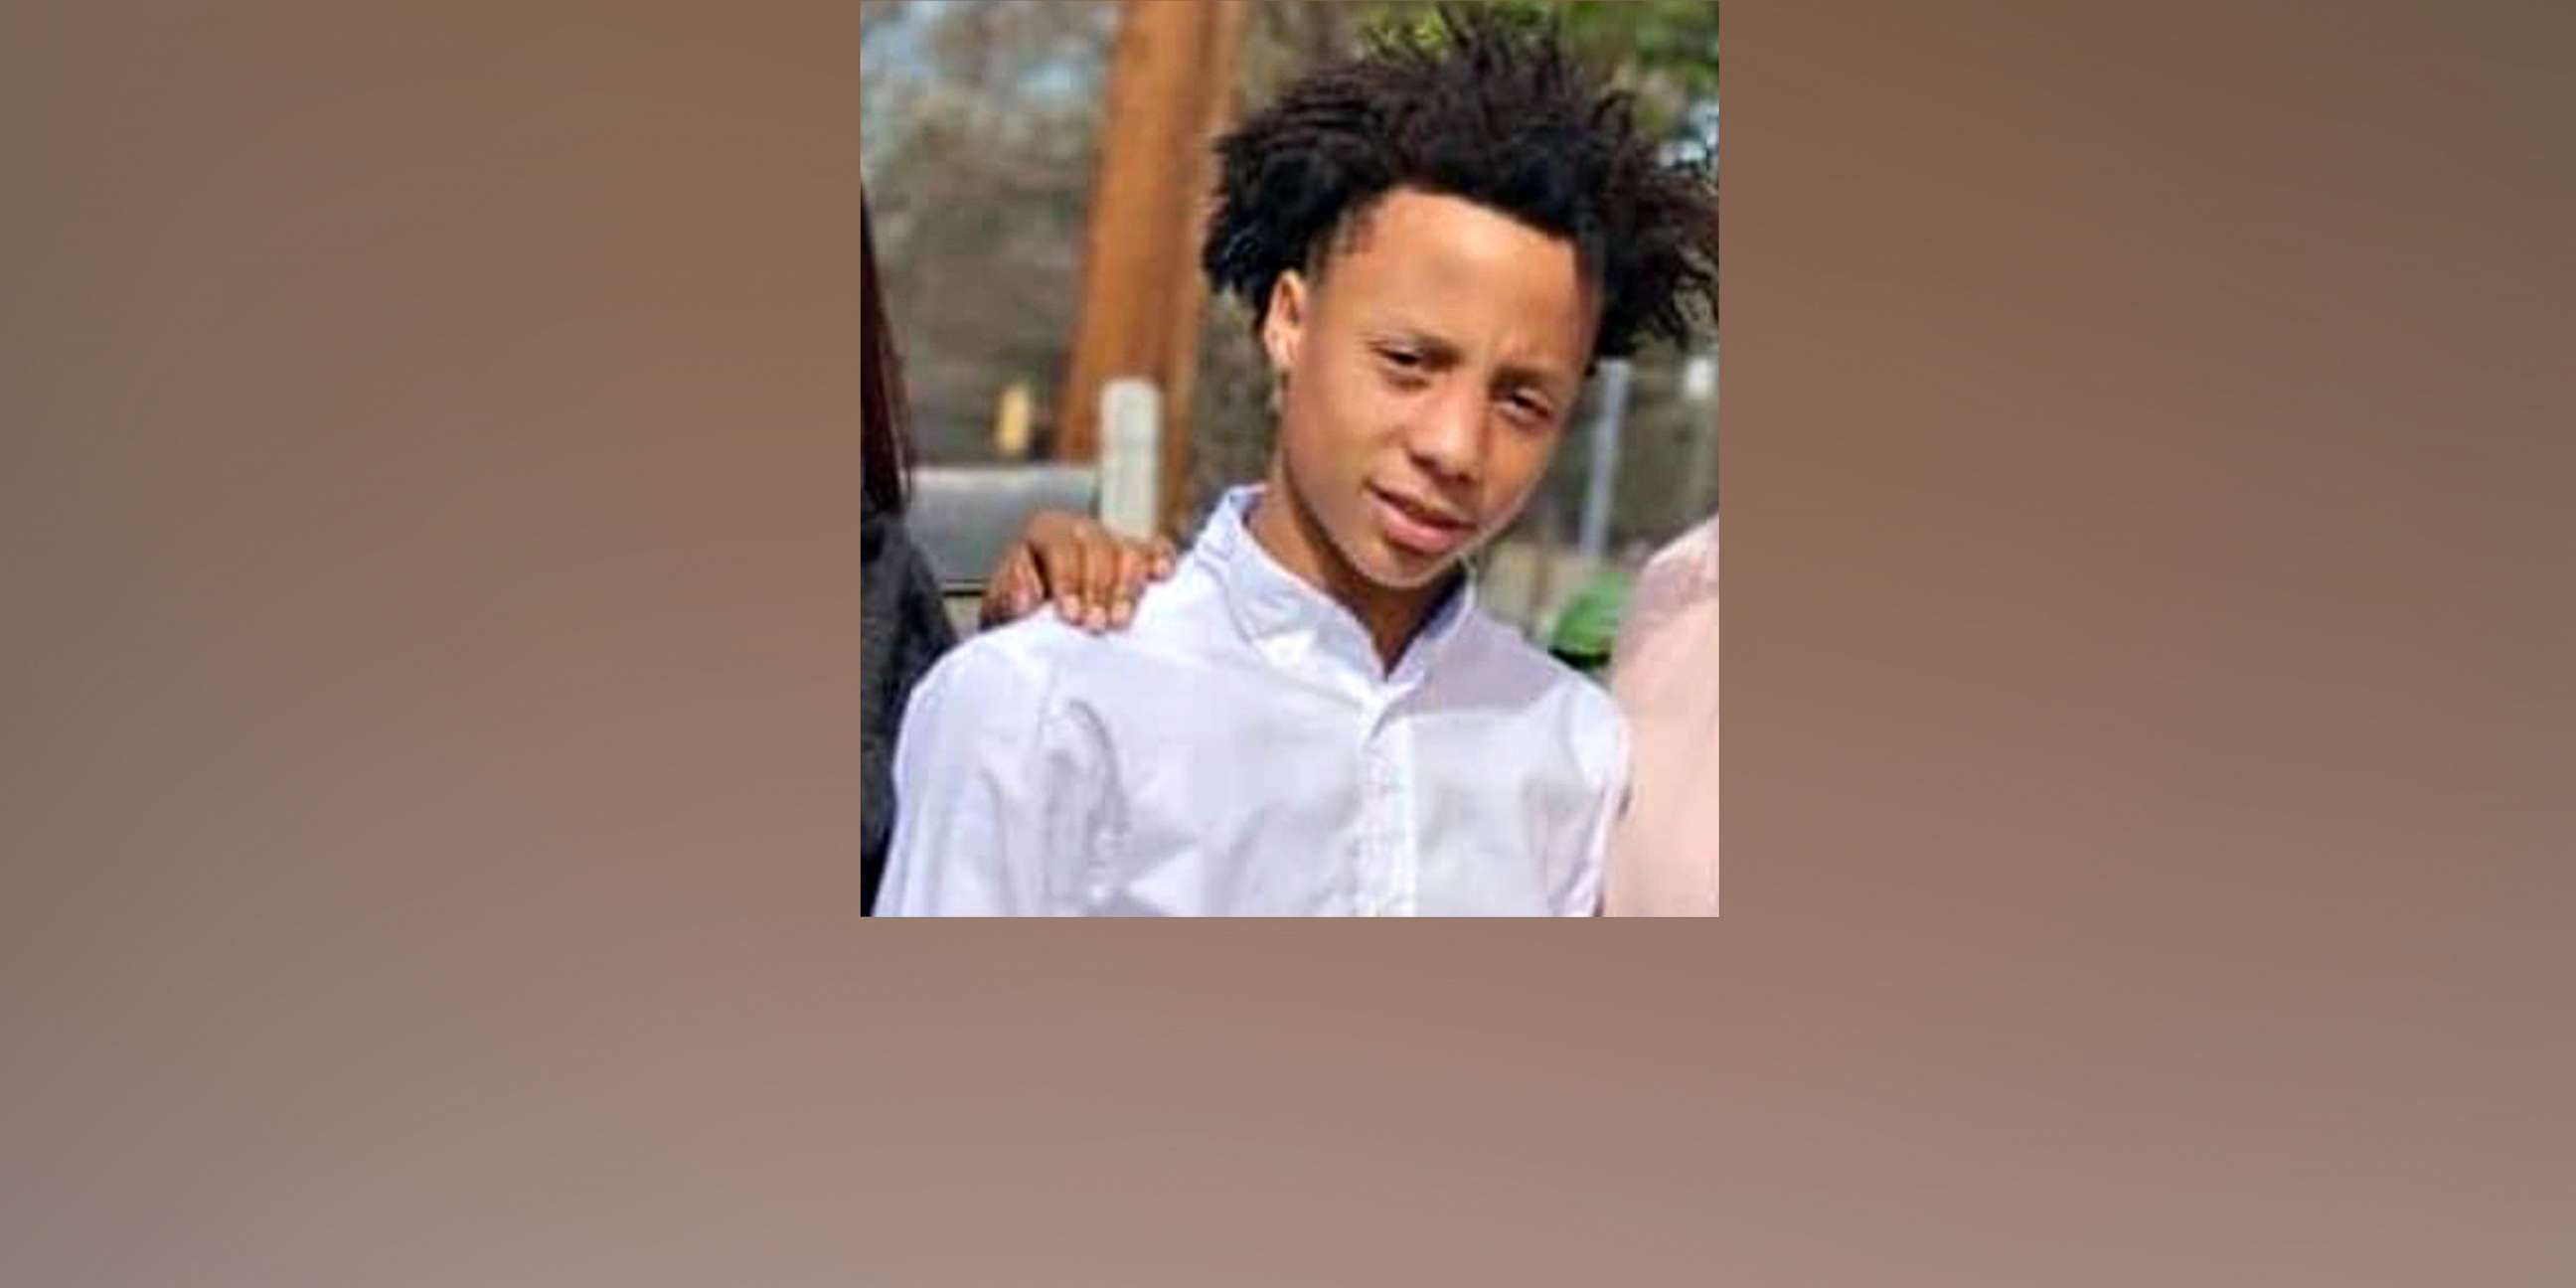 PHOTO: Vincent Truitt, 17, was killed on July 13, 2020, when police attempted to stop him and two other teens who allegedly were riding in a stolen vehicle, according to the Georgia Bureau of Investigations.